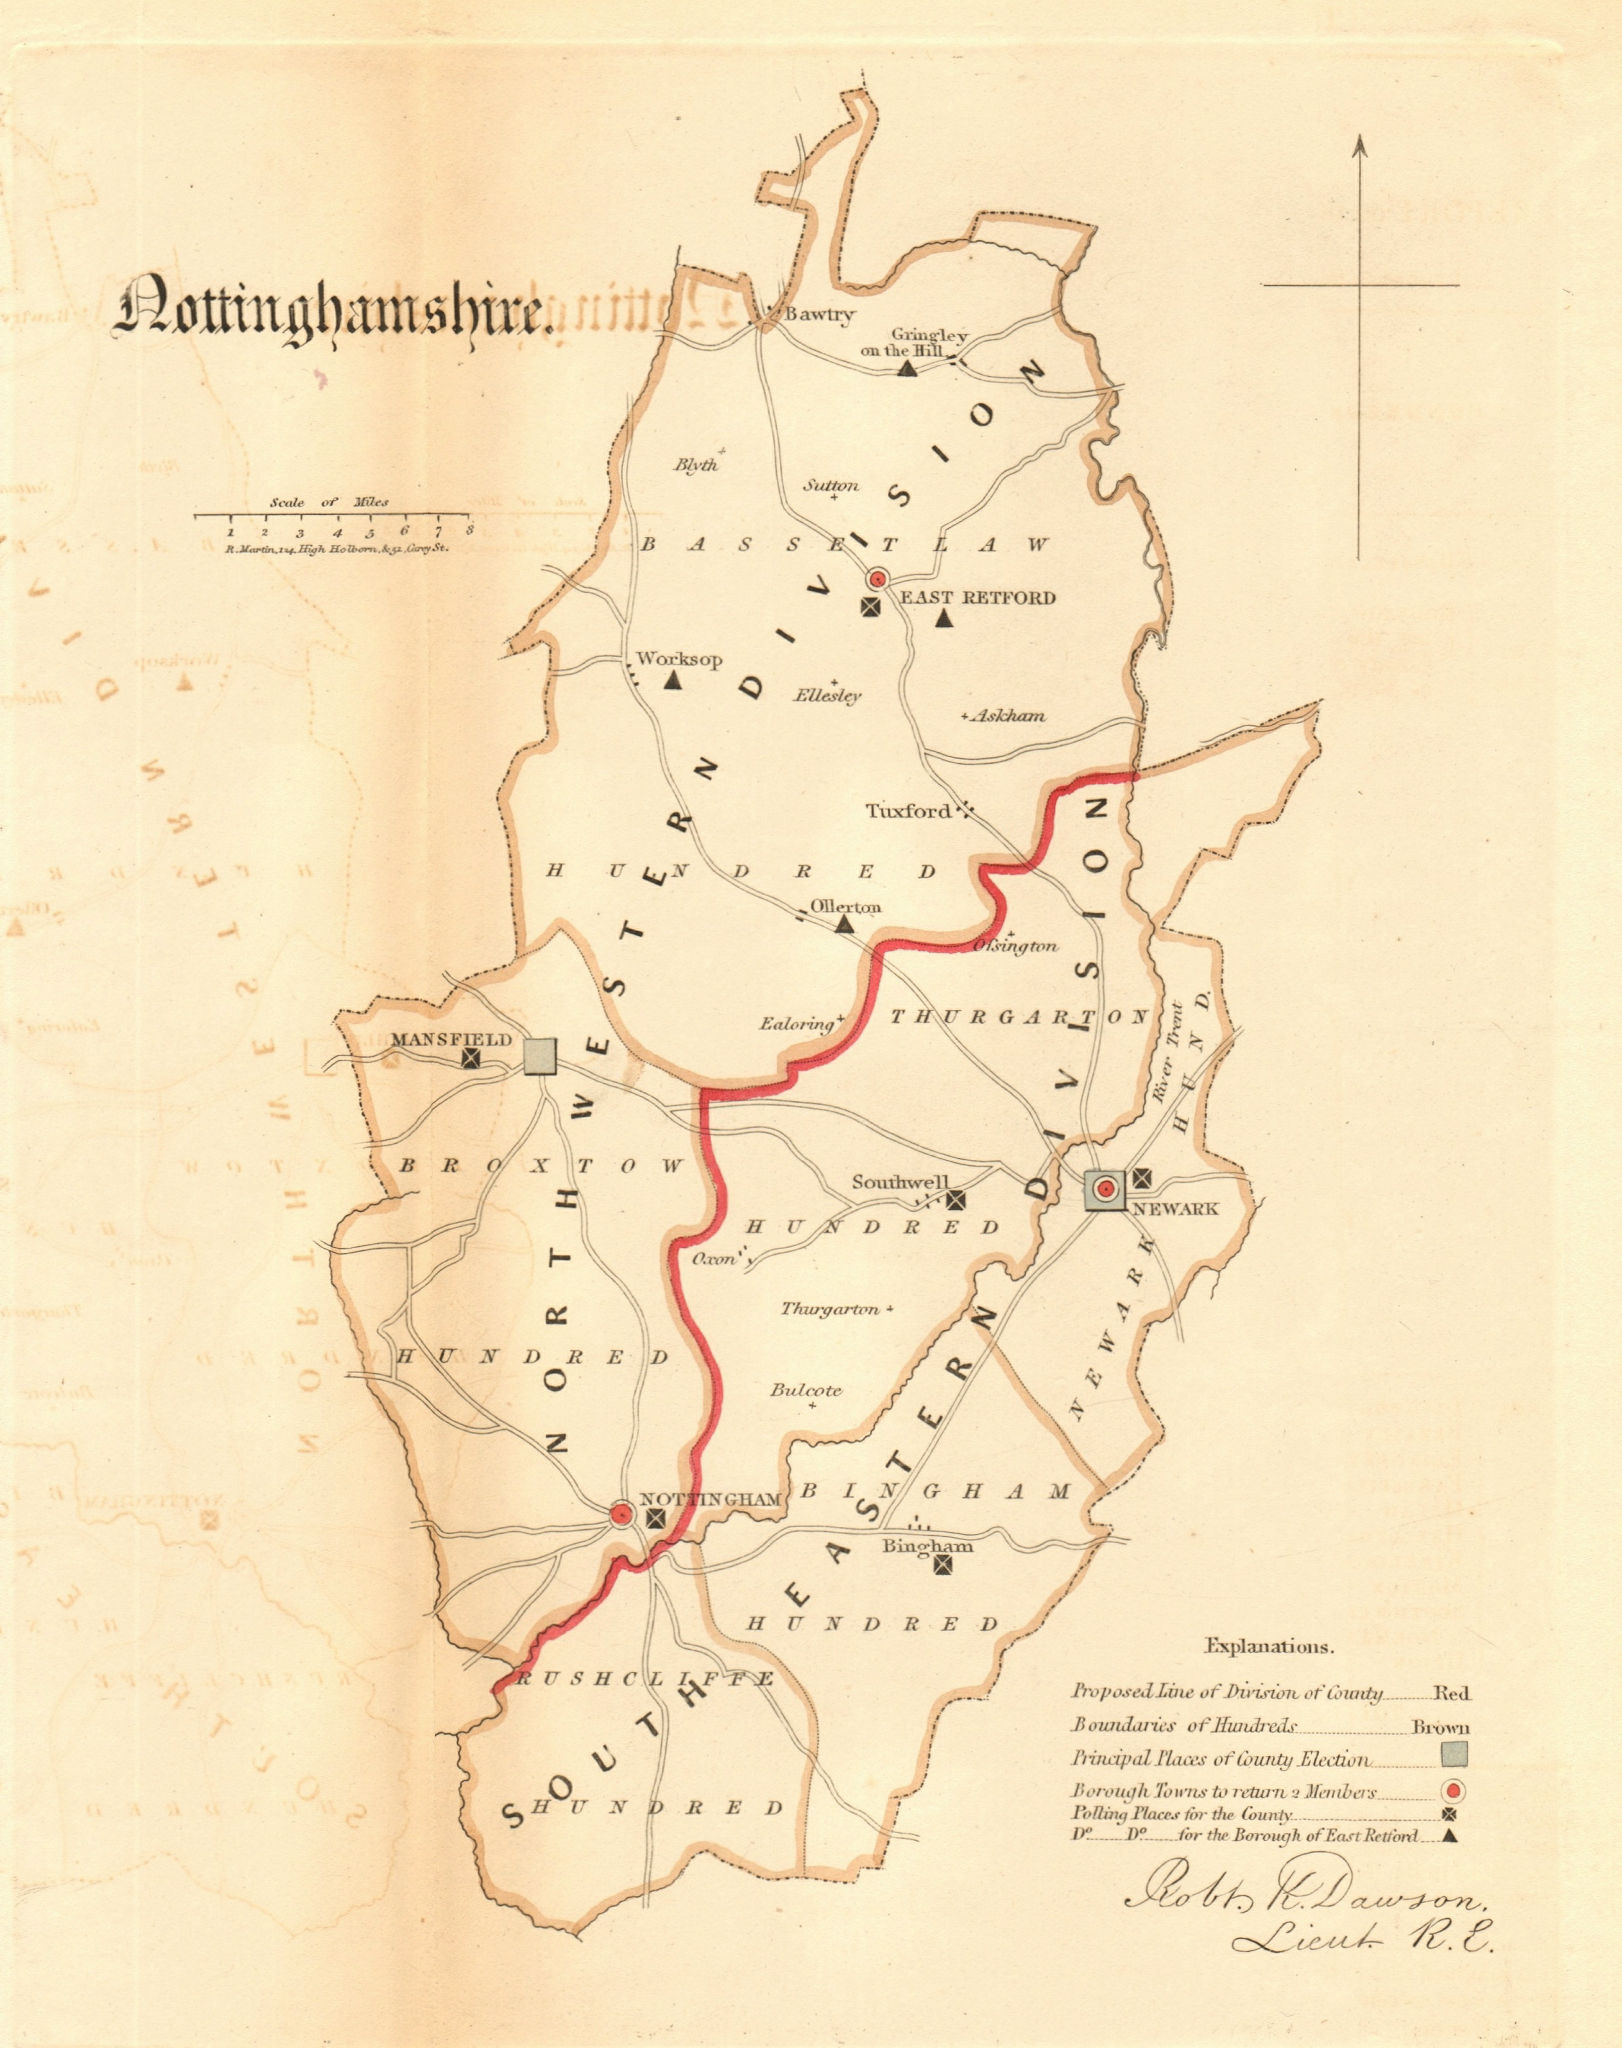 Associate Product Nottinghamshire county map. Divisions boroughs electoral REFORM ACT. DAWSON 1832